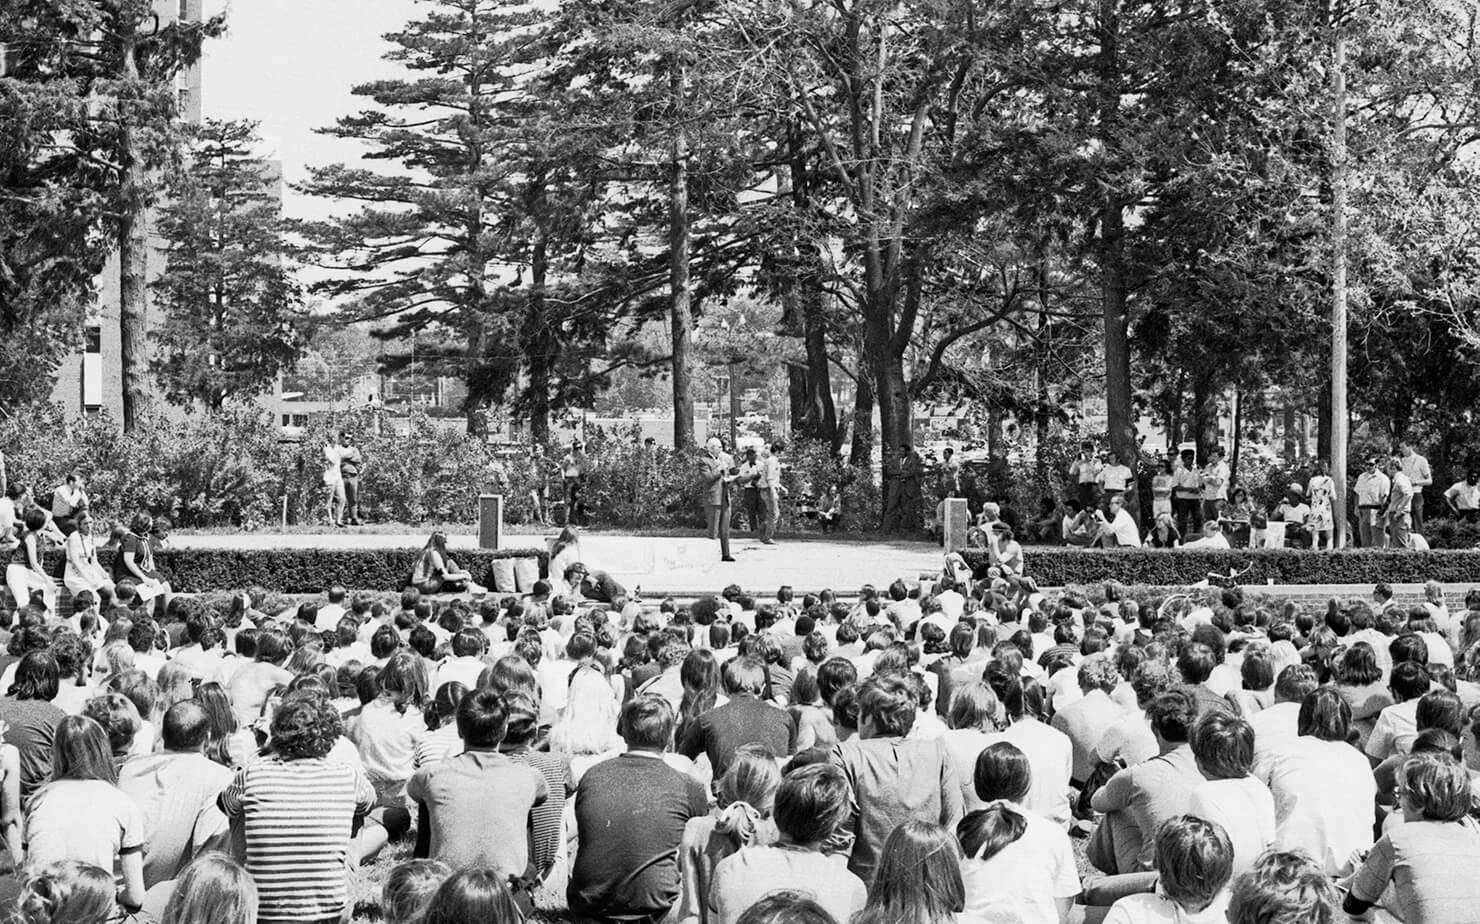 Middle-aged white man in a suit speaks to a group of hundreds of seated college students.